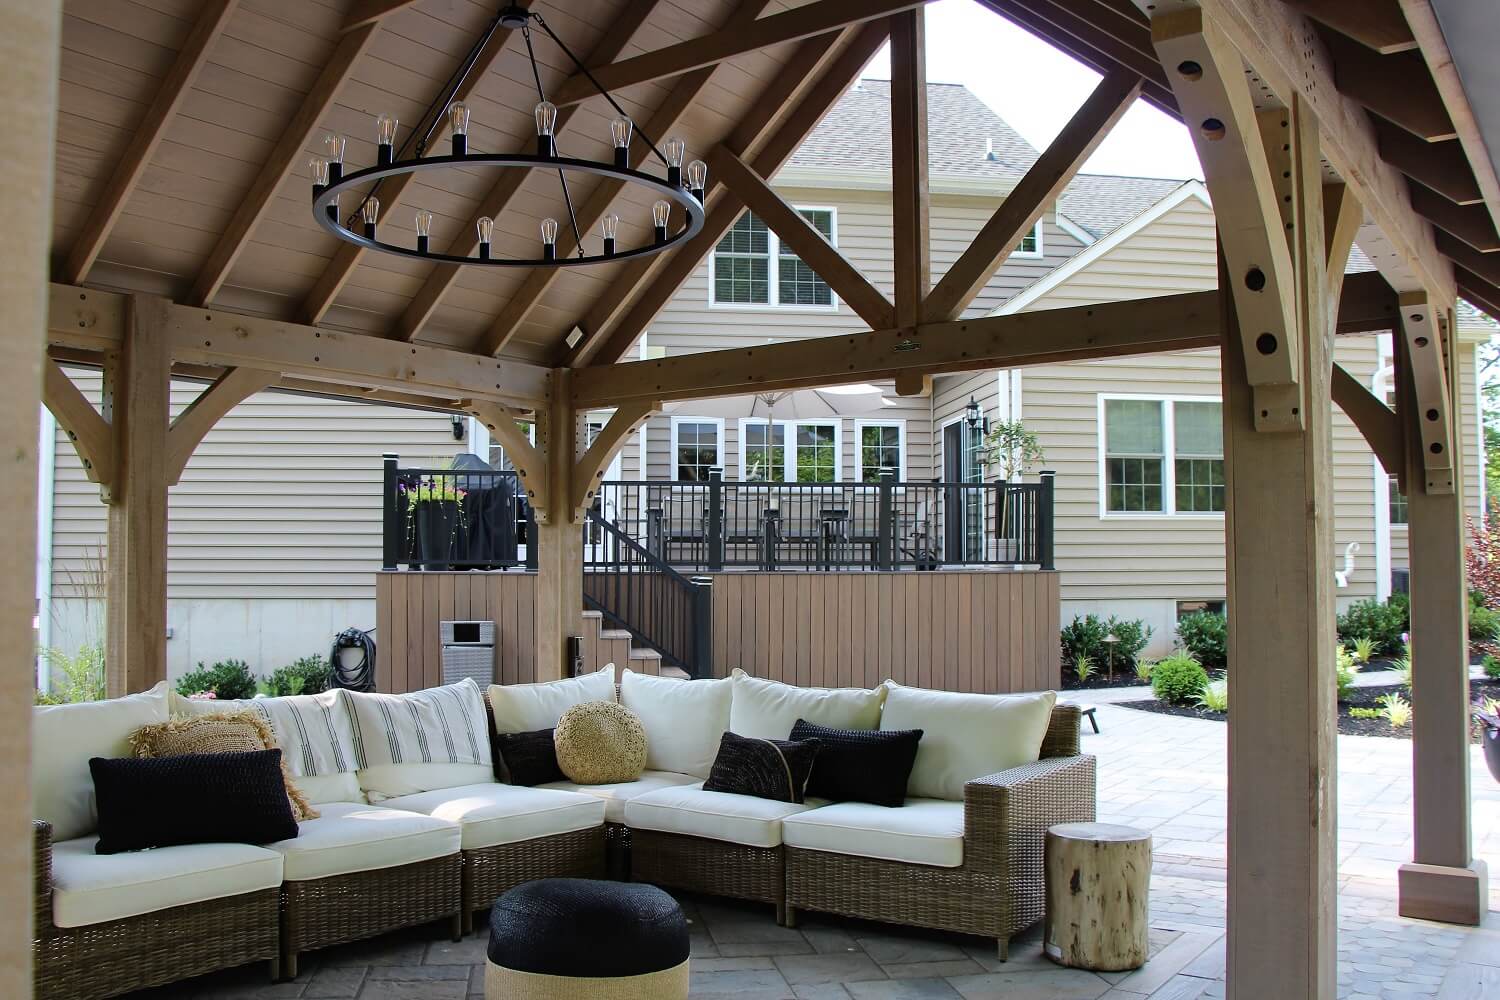 Outdoor pavilion with chandelier and sofa | After Picture of ew Landscaping Project In Malvern | Burkholder Landscape